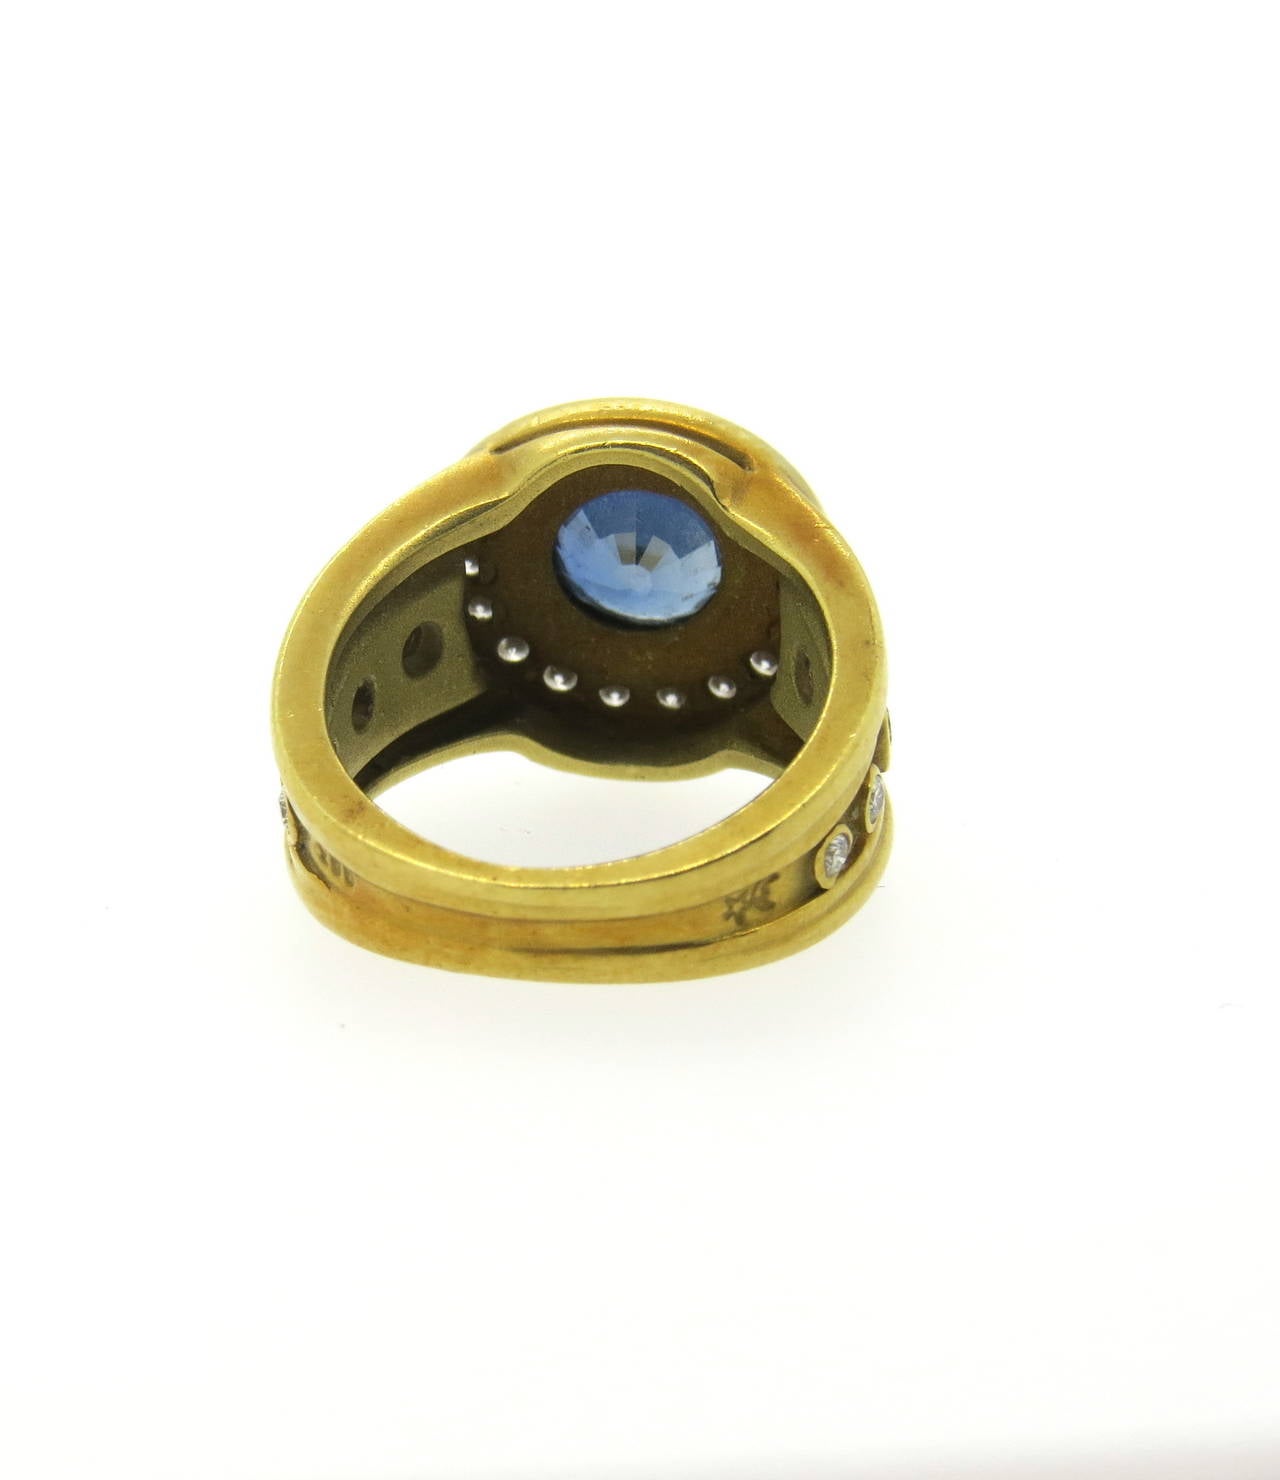 An 18k gold ring set with a sapphire weighing approximately 1.45ct accented with approximately 0.50ctw of G/VS diamonds.  Crafted by Barry Kieselstein-Cord, the ring is a size 5.25 and weighs 11.1 grams.